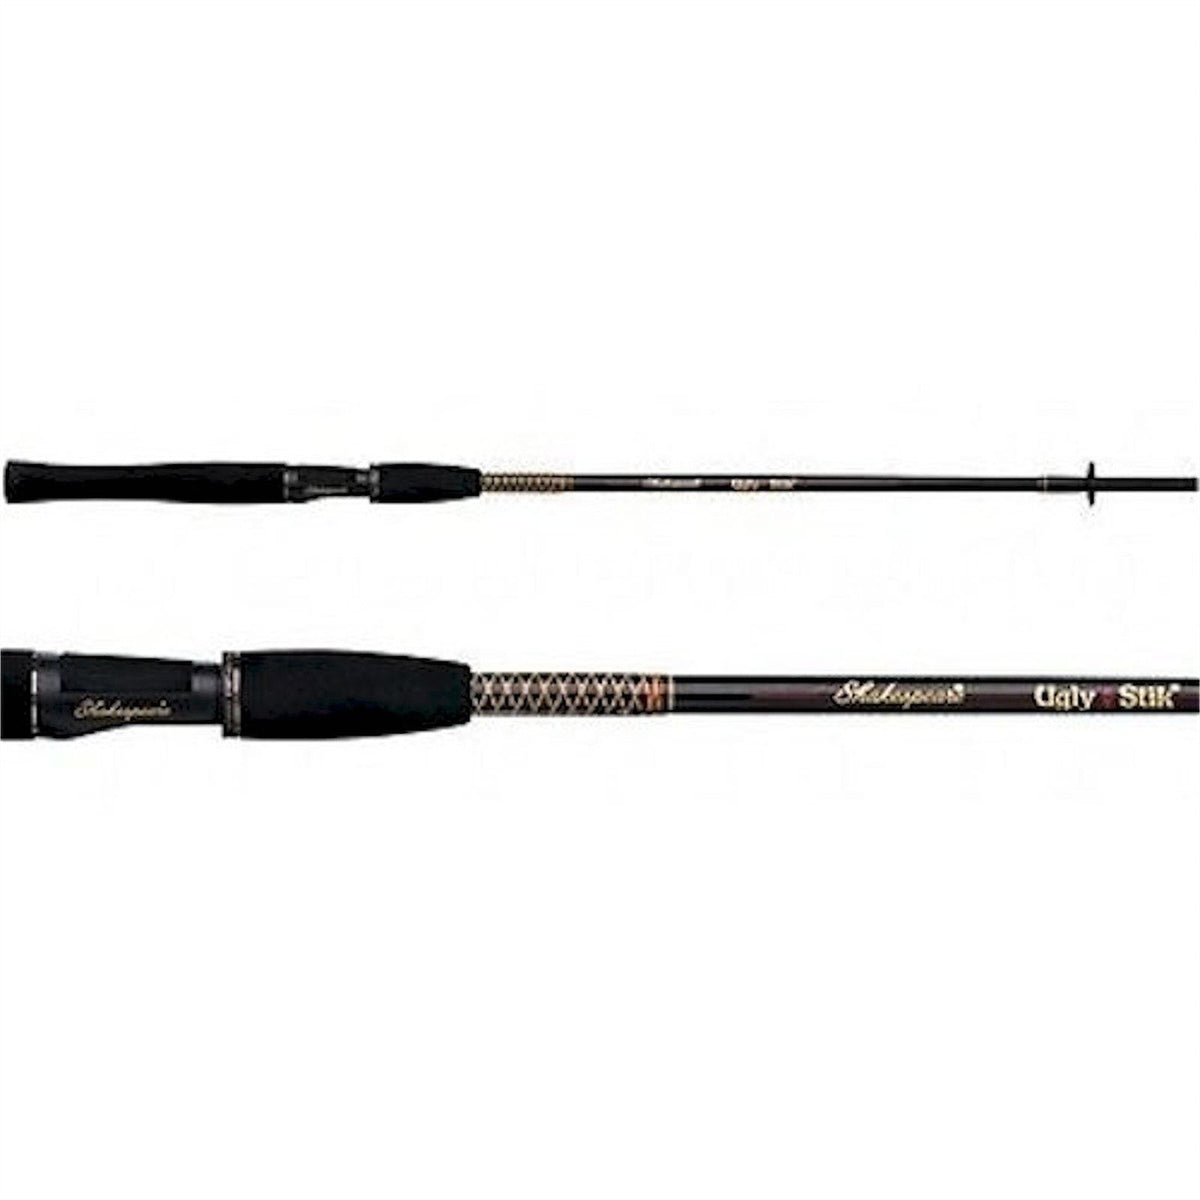 SHAKESPEARE UGLY STIK BWS 1102 7' Fishing Rod Action:Heavy (1 Piece) Mint!  $43.00 - PicClick